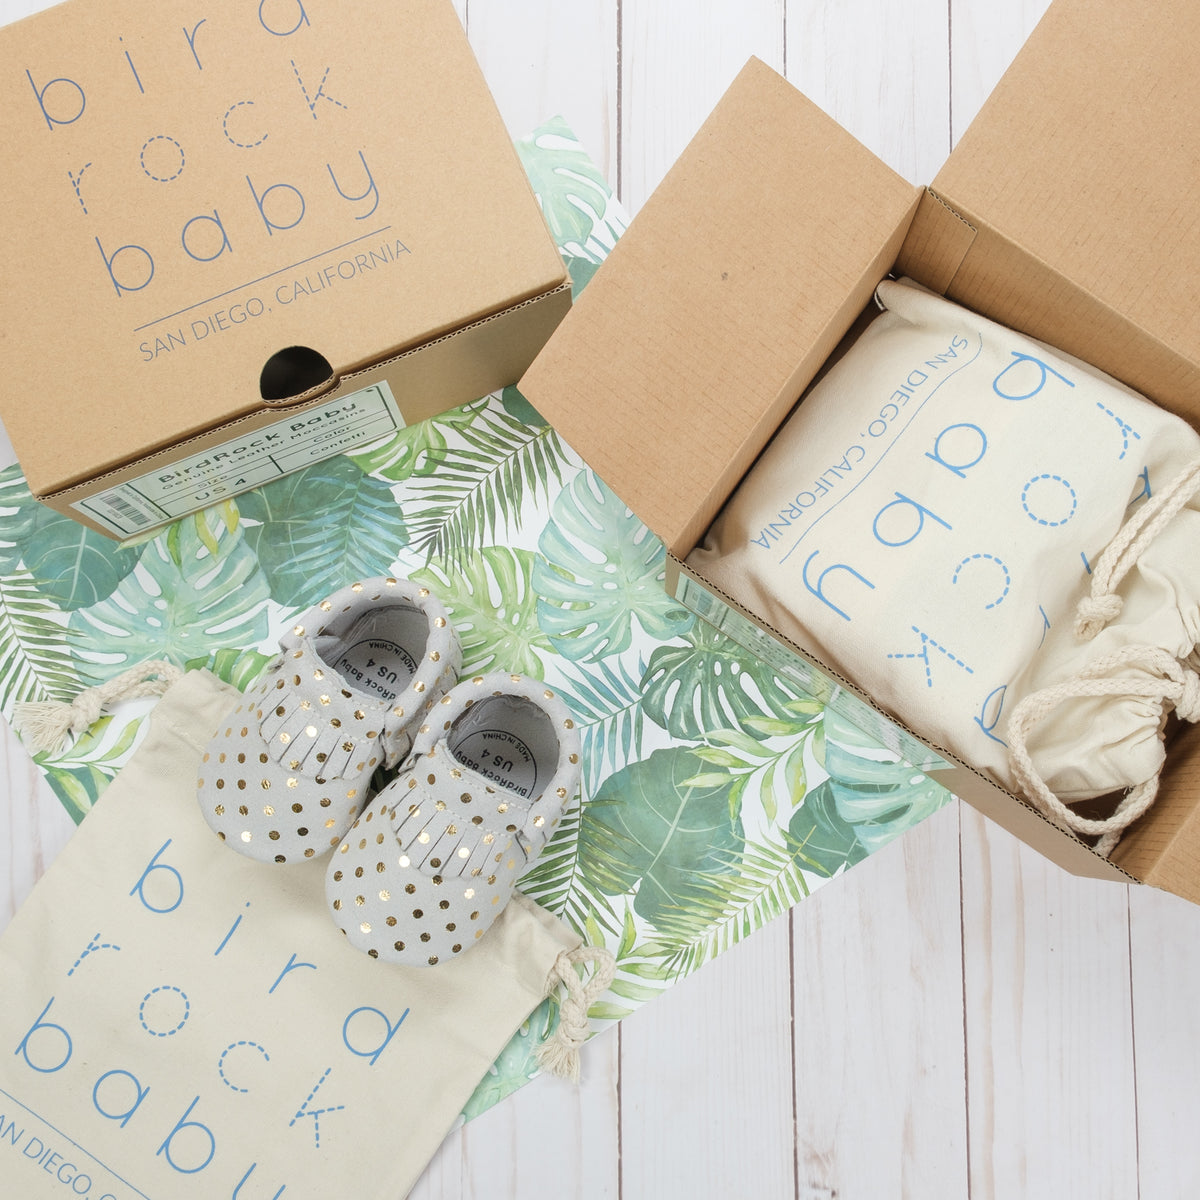 Champagne Baby Moccasins | BirdRock Baby